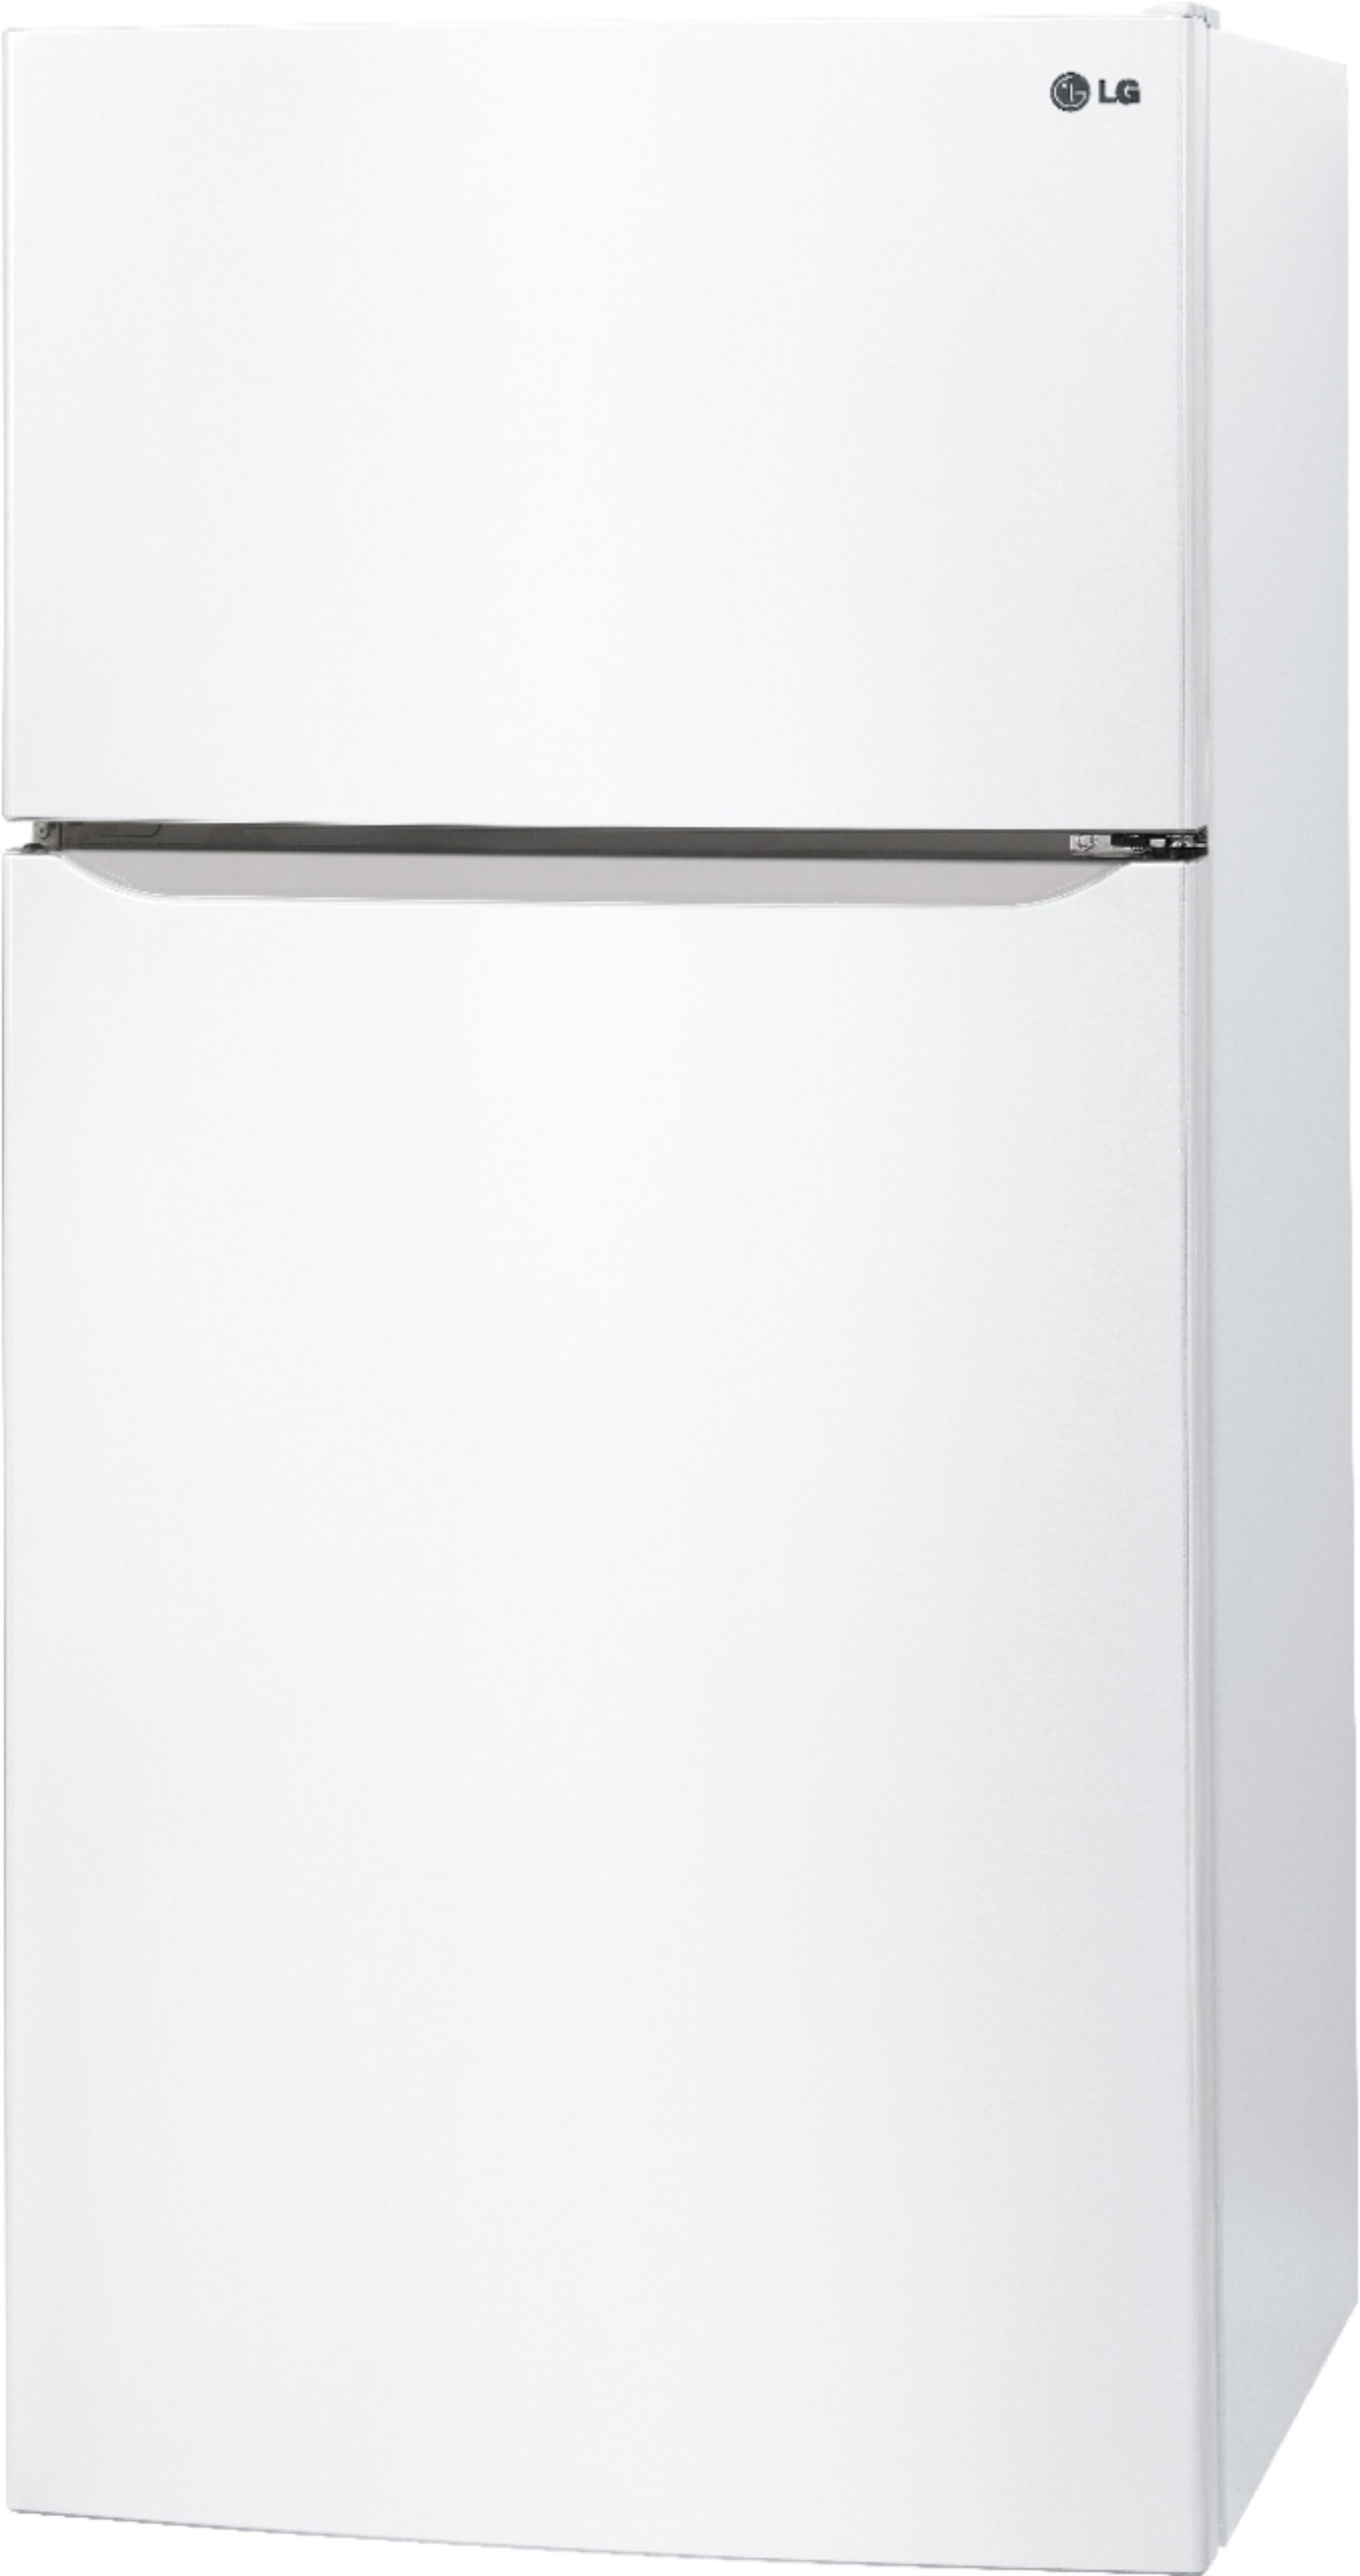 Left View: LG - 23.8 Cu. Ft. Top-Freezer Refrigerator with Ice Maker - Smooth White